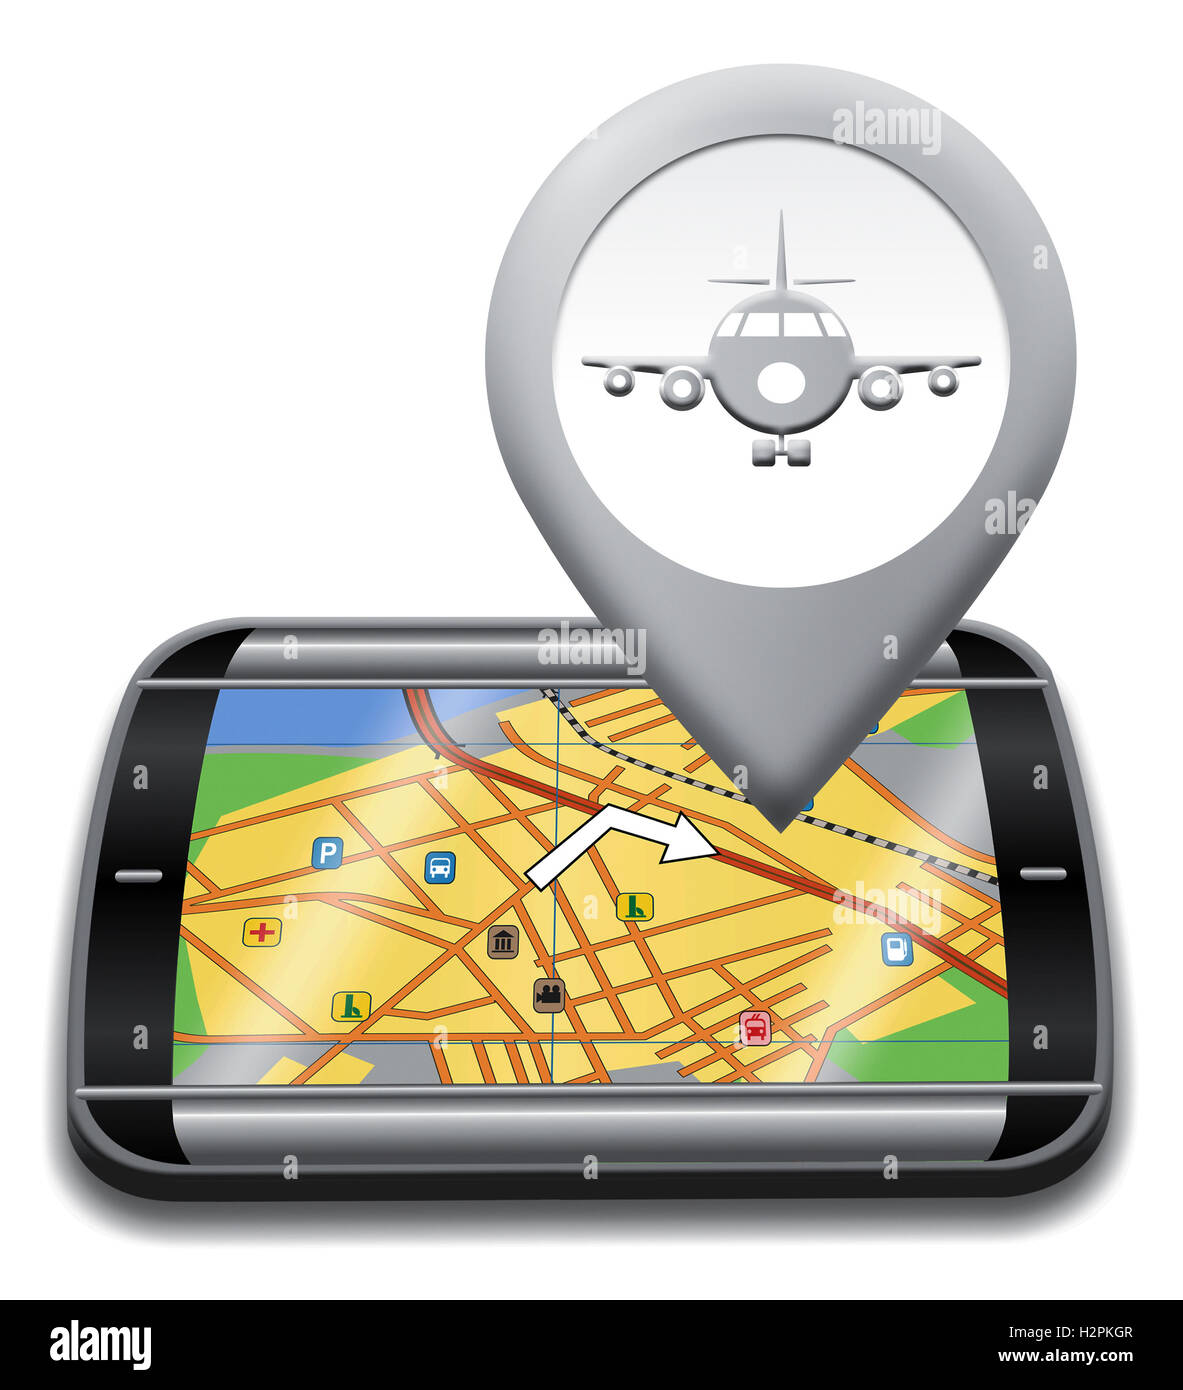 Airport Gps Device Shows Landing Strip Map 3d Illustration Stock Photo